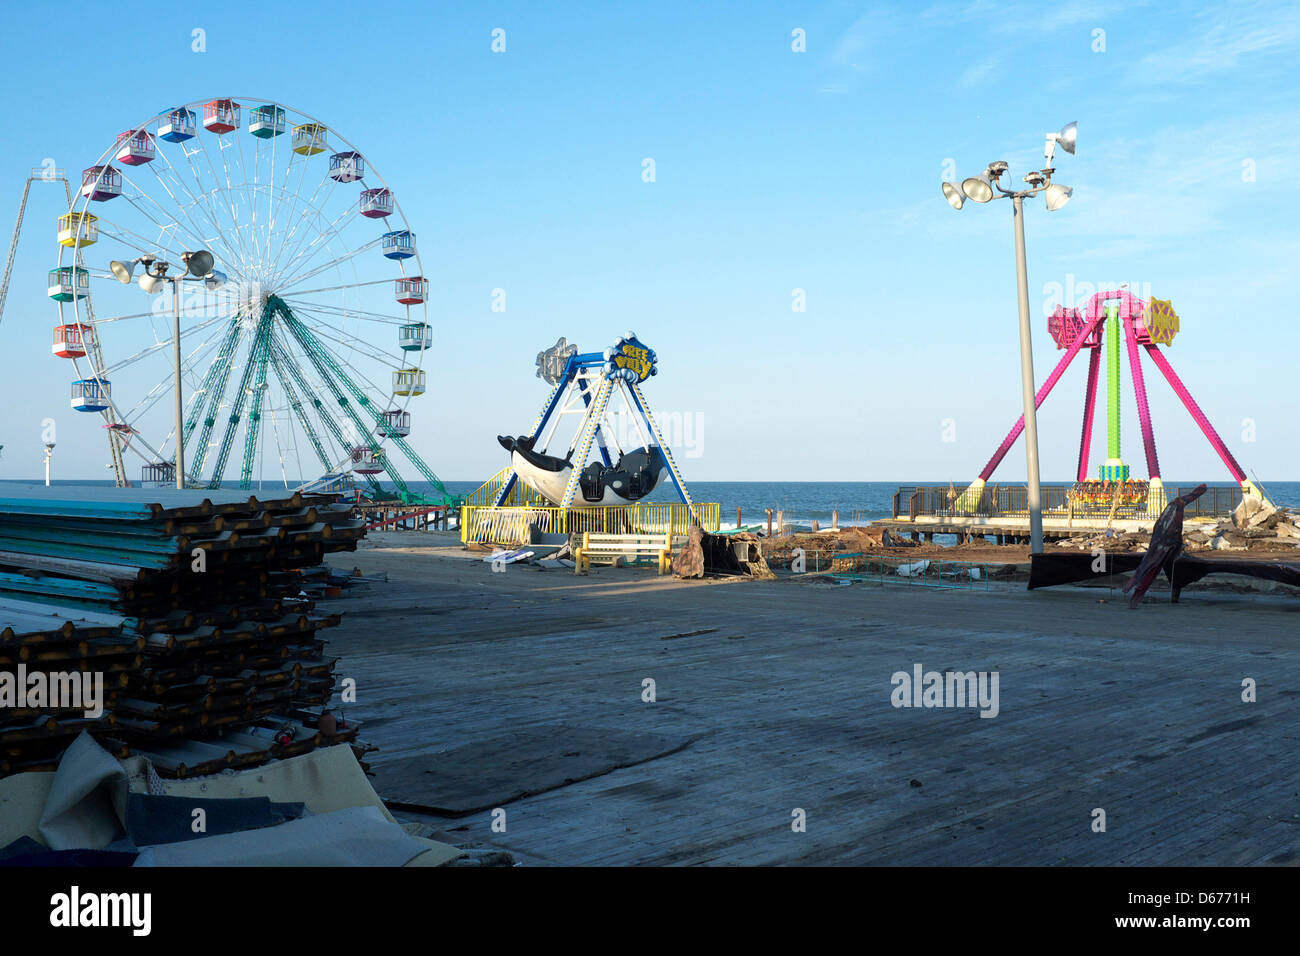 Completed section of boardwalk in Seaside Heights, New Jersey, USA with Ferris Wheel in the background.  This section of the boardwalk is not yet open to the public. The boardwalk was destroyed by Hurricane Sandy in October of 2012.  Seaside Heights is racing to complete the boardwalk before Memorial Day and the start of the summer season Stock Photo